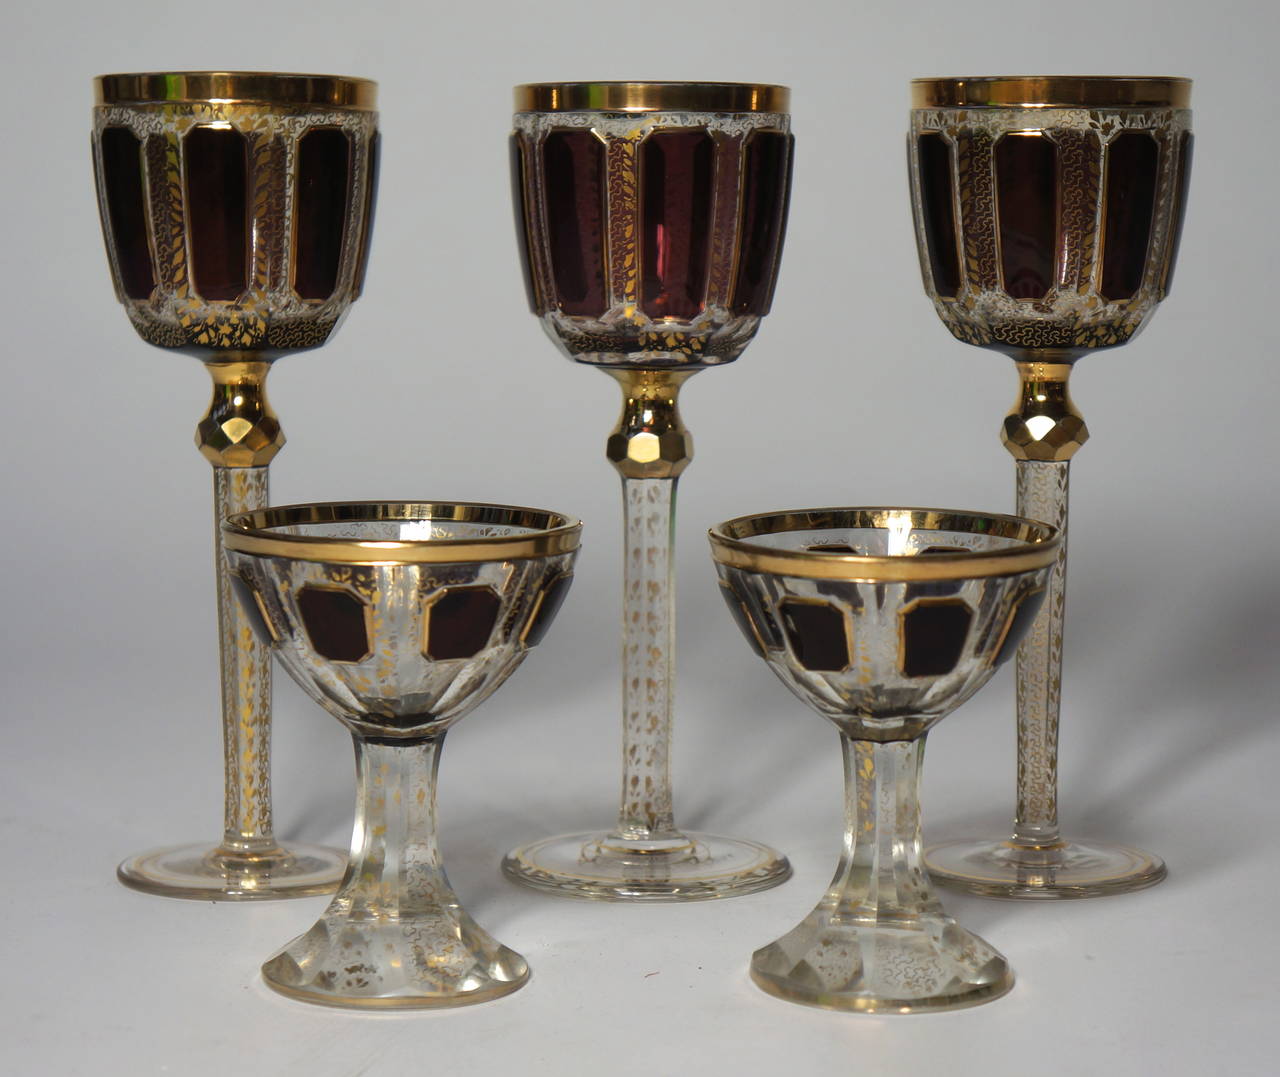 A fine and rare collection of late 19th century Moser cut crystal glasses comprising:

Three amethyst coloured cabochon stemmed wine glasses, covered overall with gilt leaves and curls and gilt rim
Nine red colored cabochon medieval style calice